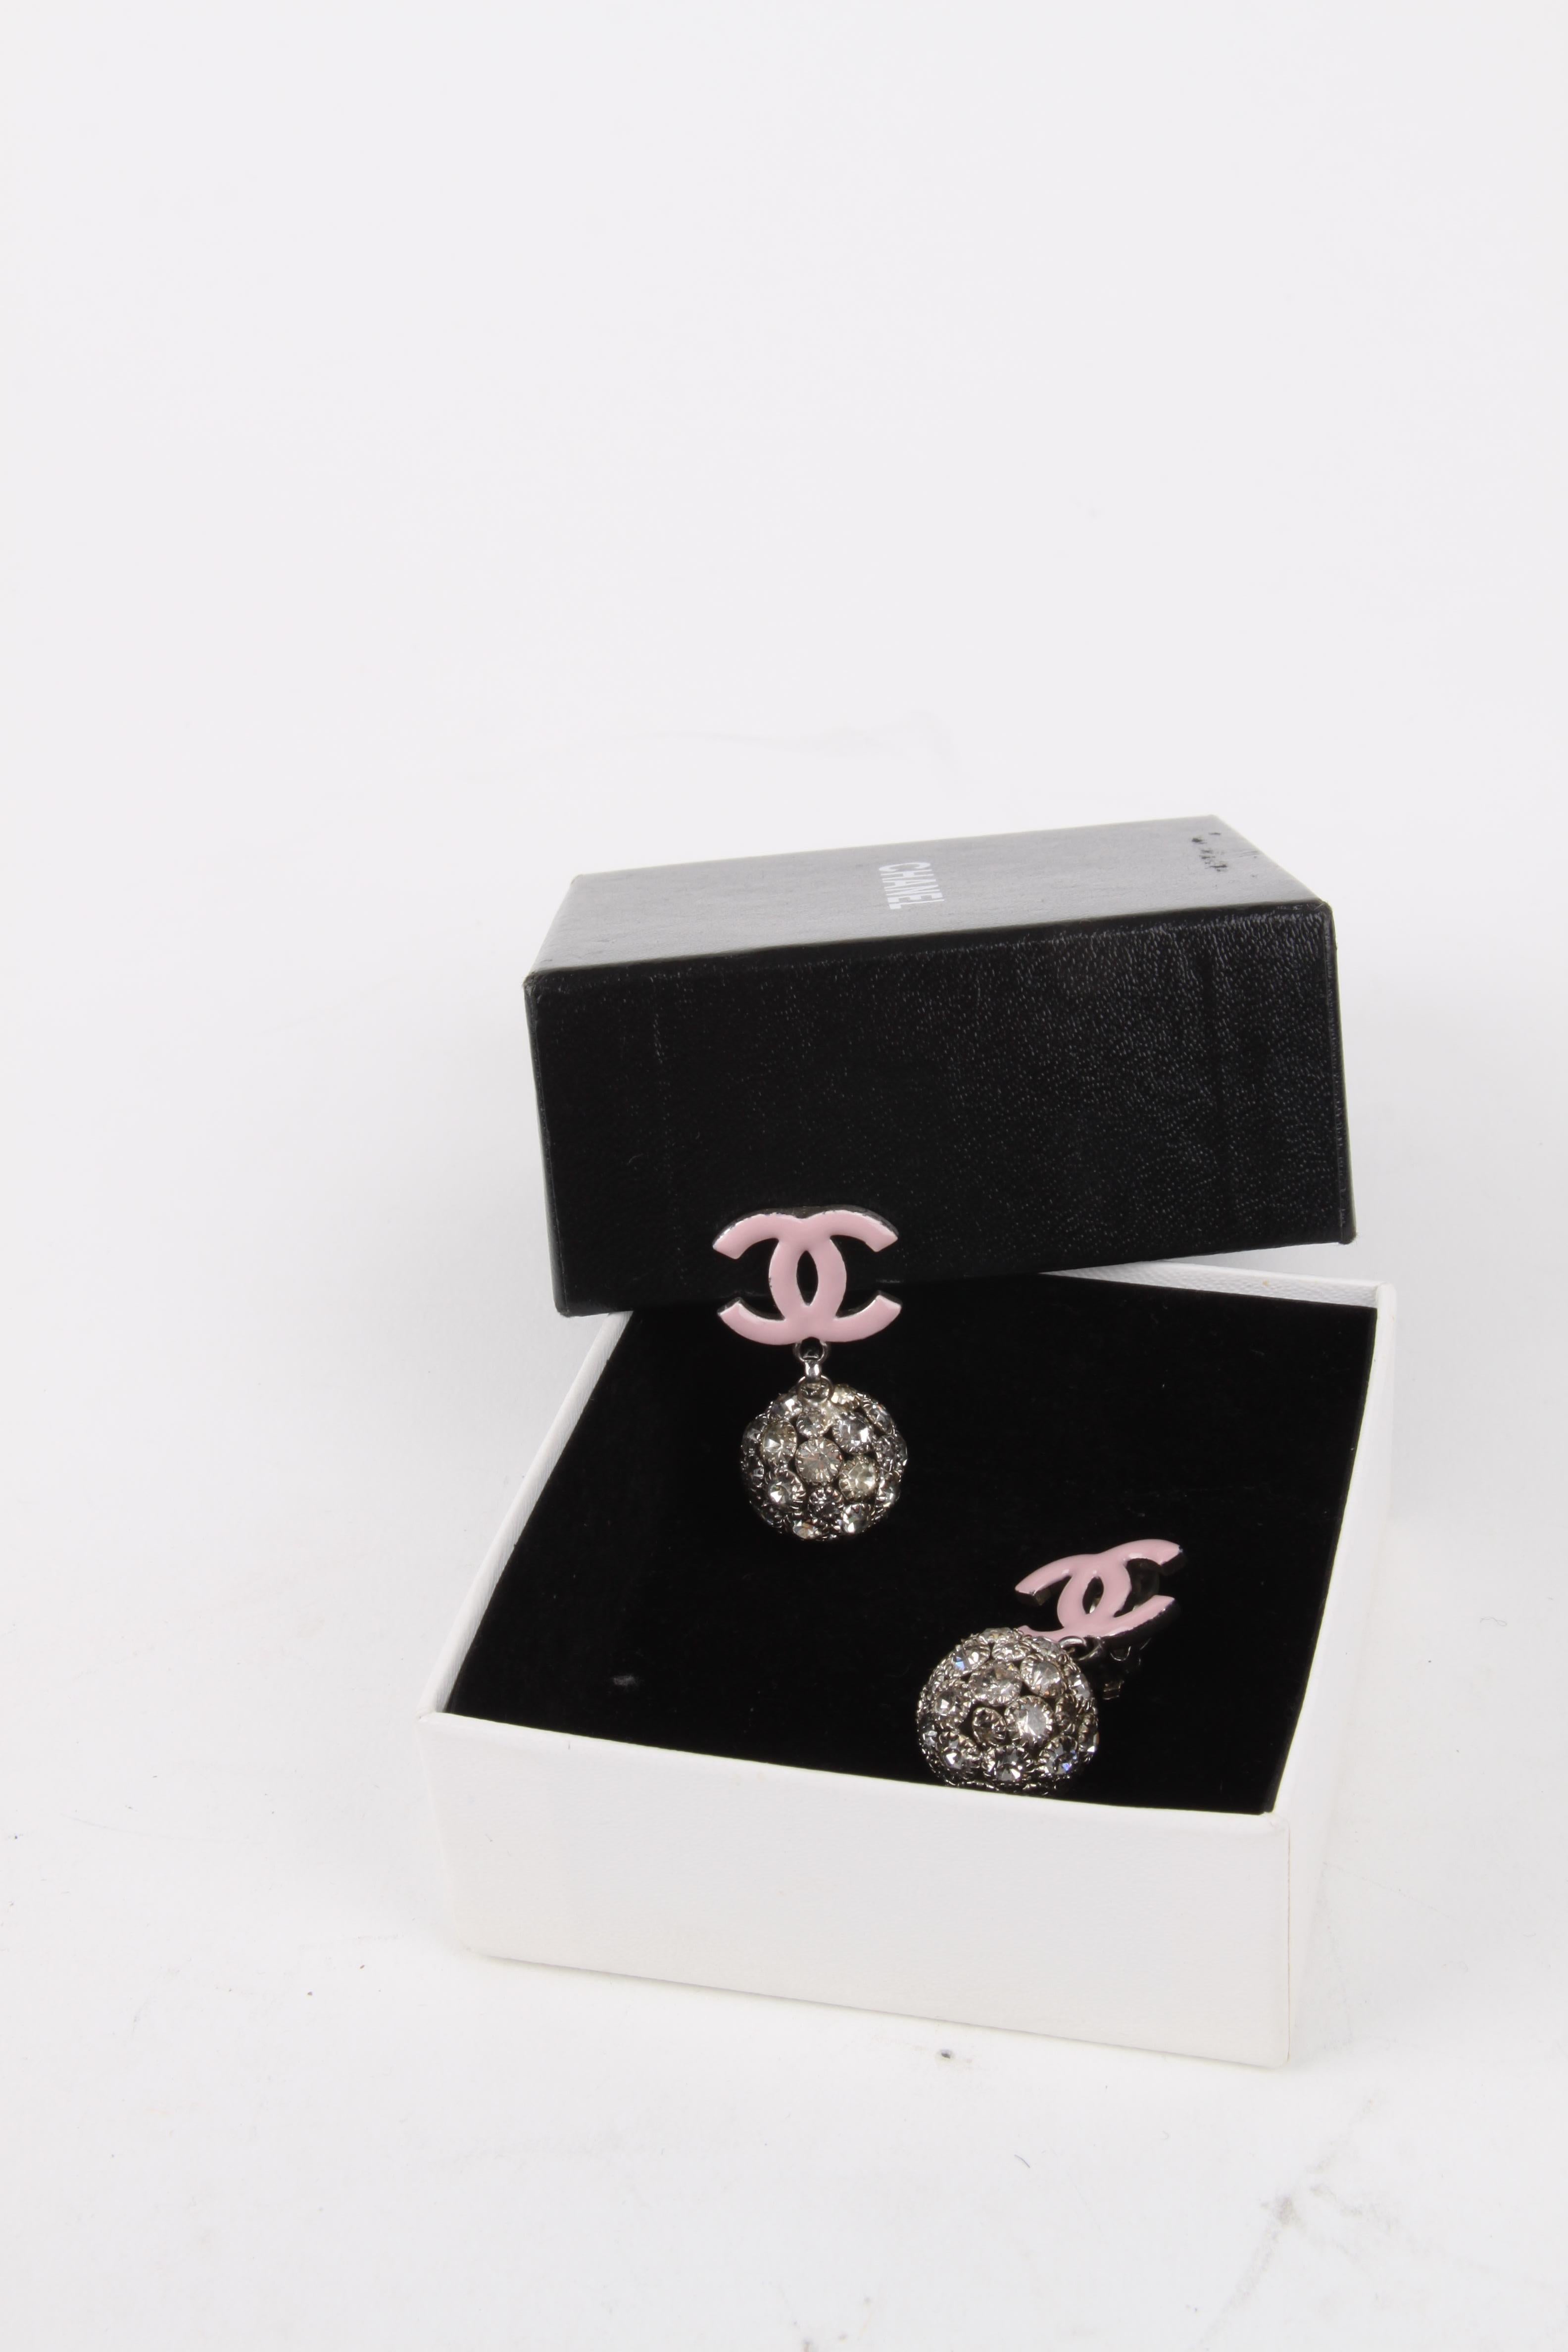 Chanel 2008 Cruise Collection (08C) Pastel Pink Logo Silver Rhinestone Crystal Embellished Ball Clip-On Earrings.

These earrings feature a lux crystal embellished ball exterior with a pink enamel CC-logo embellished finish. The earrings feature a